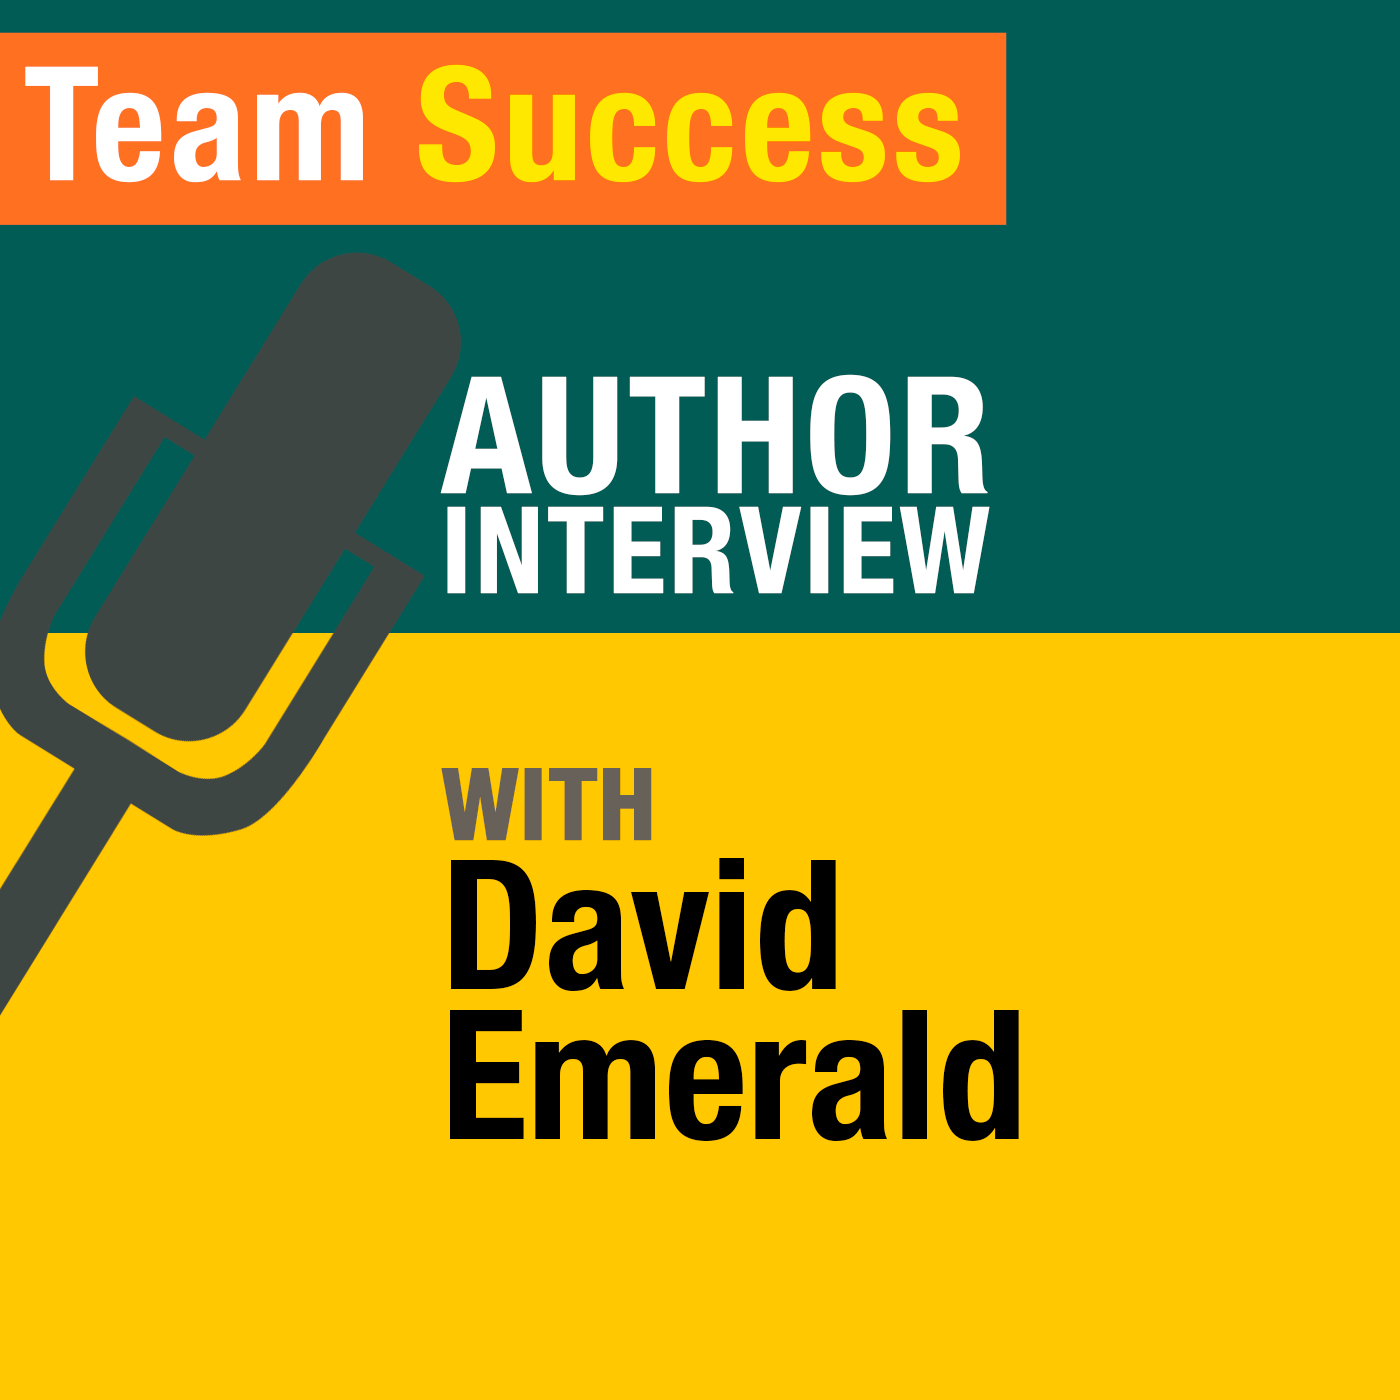 Shifting From Victim To Creator with The Power of TED Author David Emerald